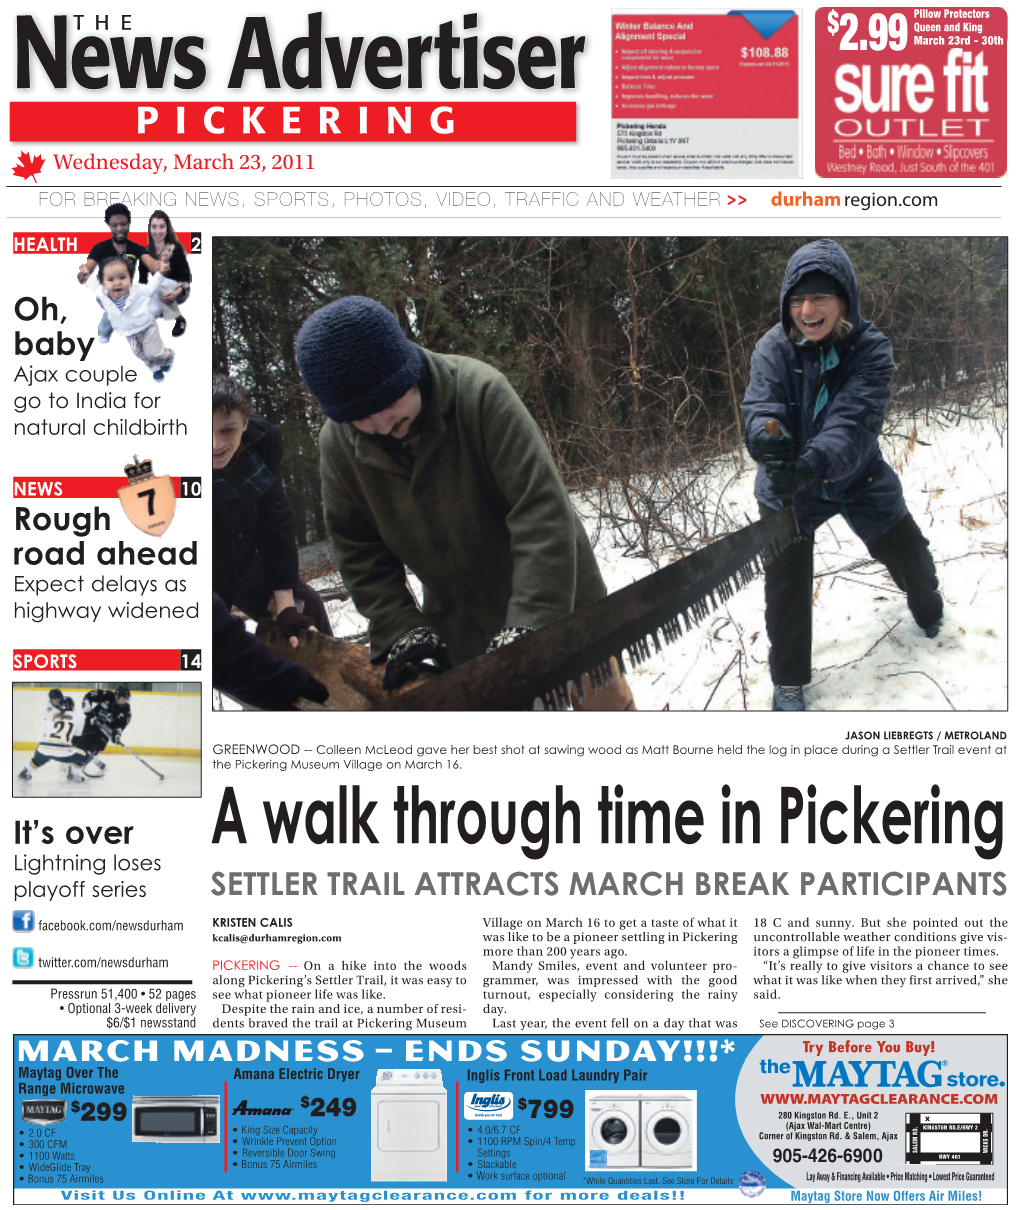 News Advertiser 2.99 March 23Rd - 30Th PICKERING Wednesday, March 23, 2011